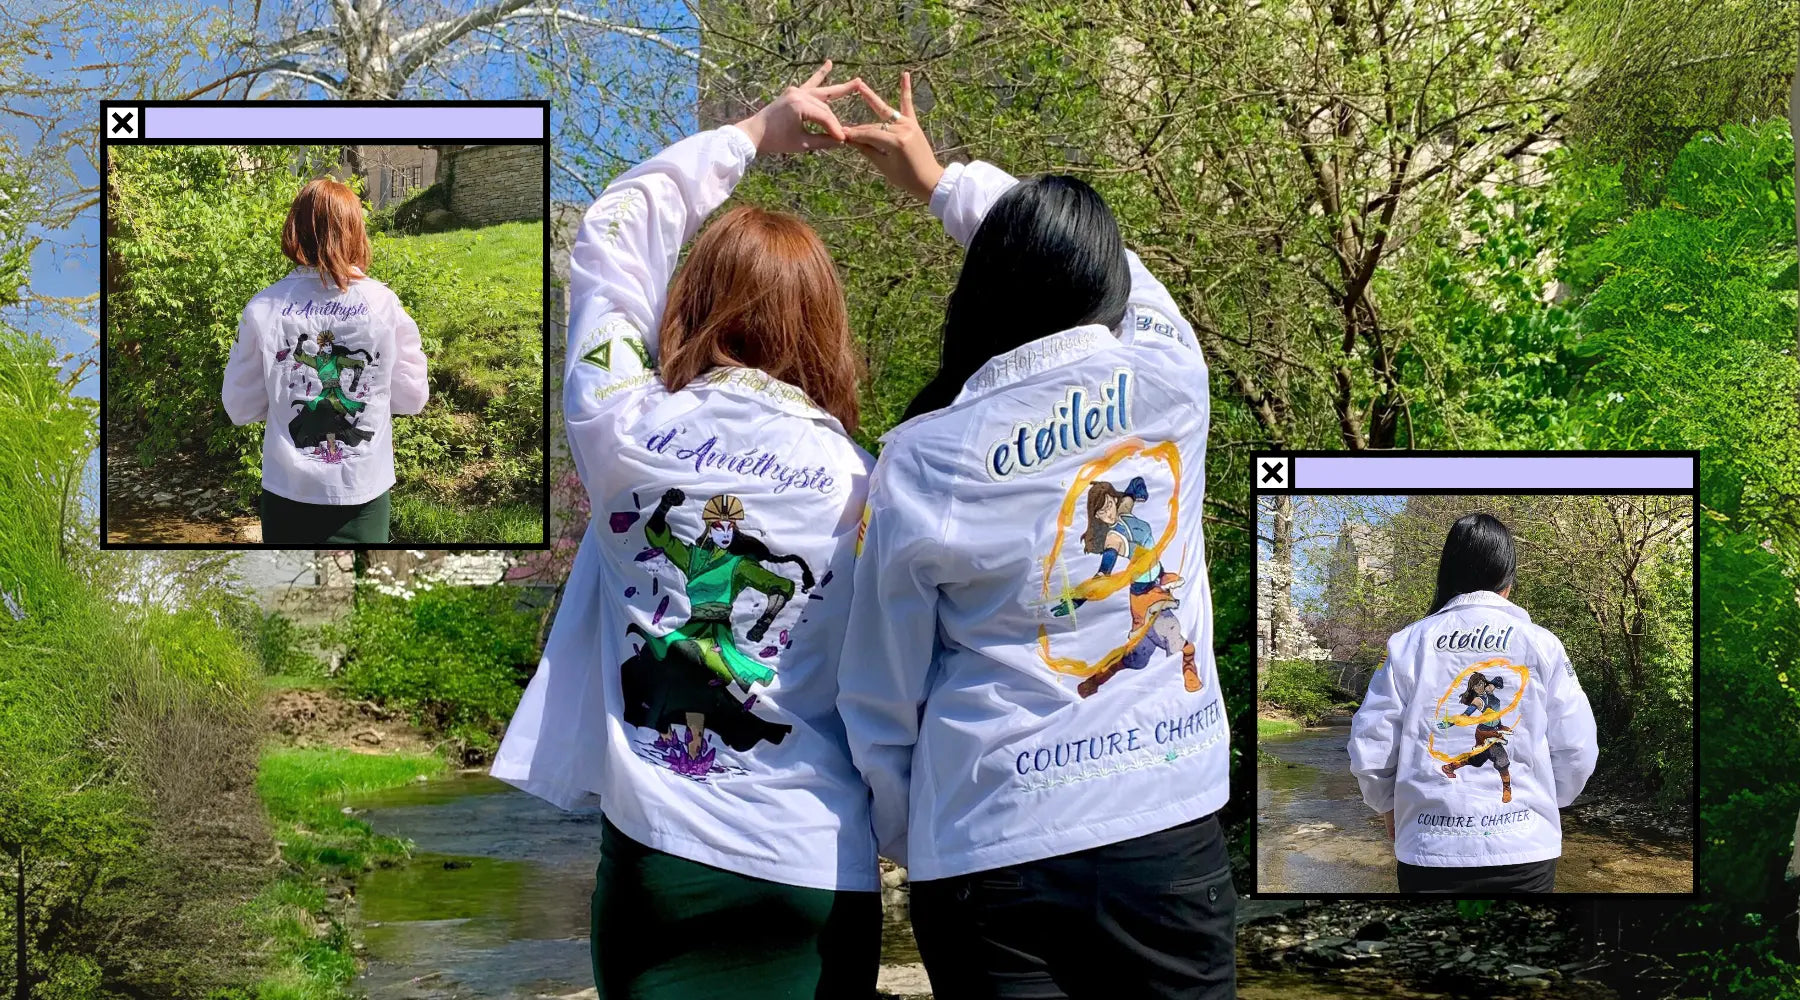 May and their little posing with their custom backvline jackets